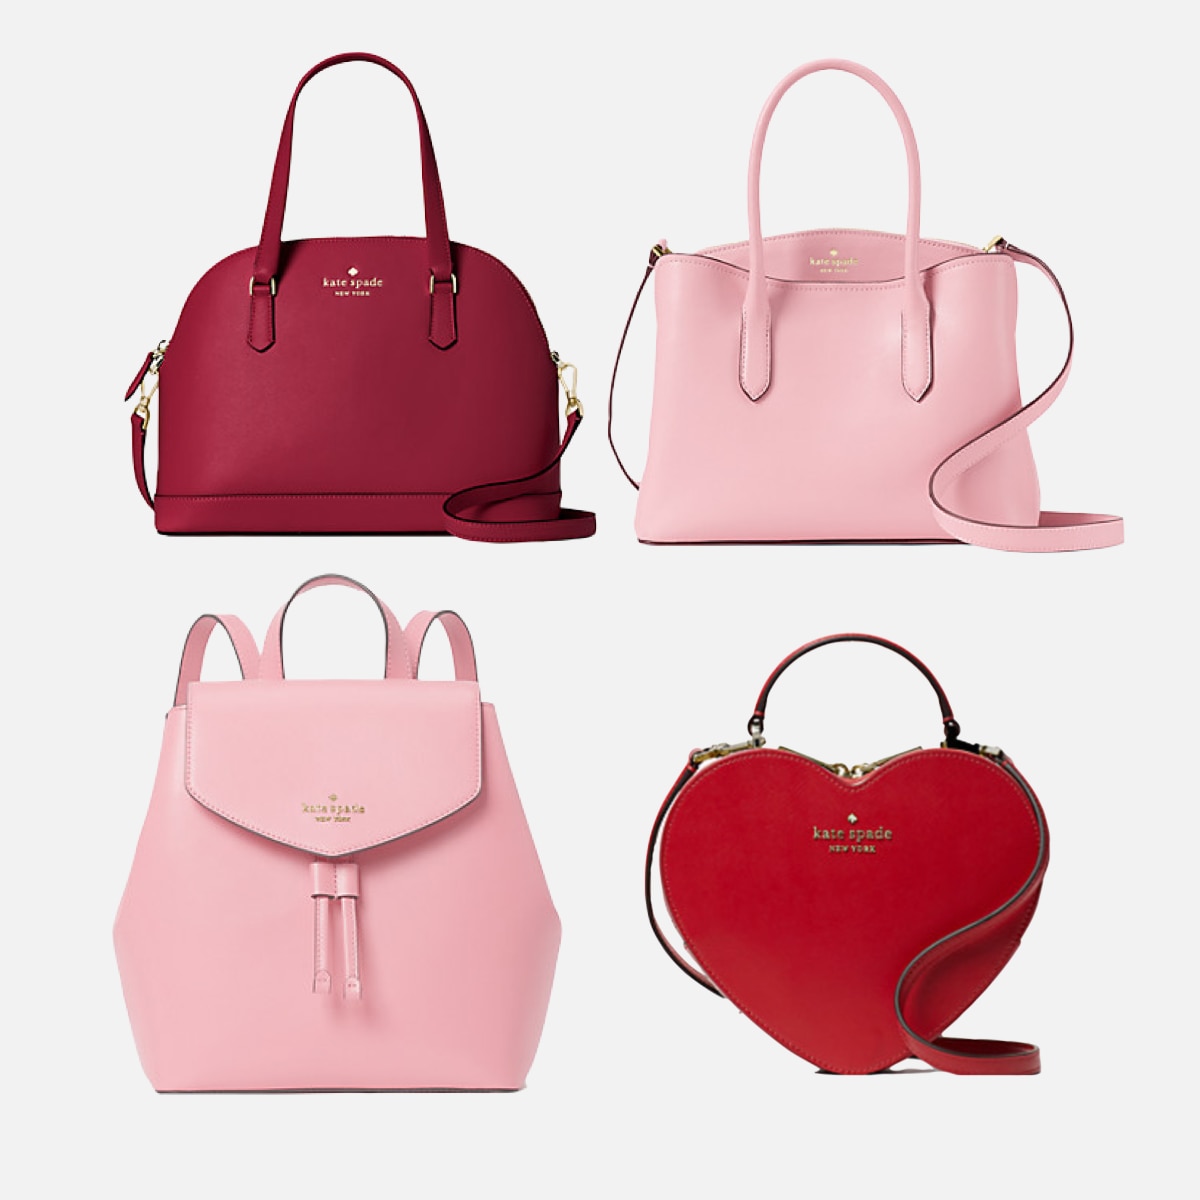 Kate Spade Surprise Sale Is Here With 75% Off EverythingHelloGiggles